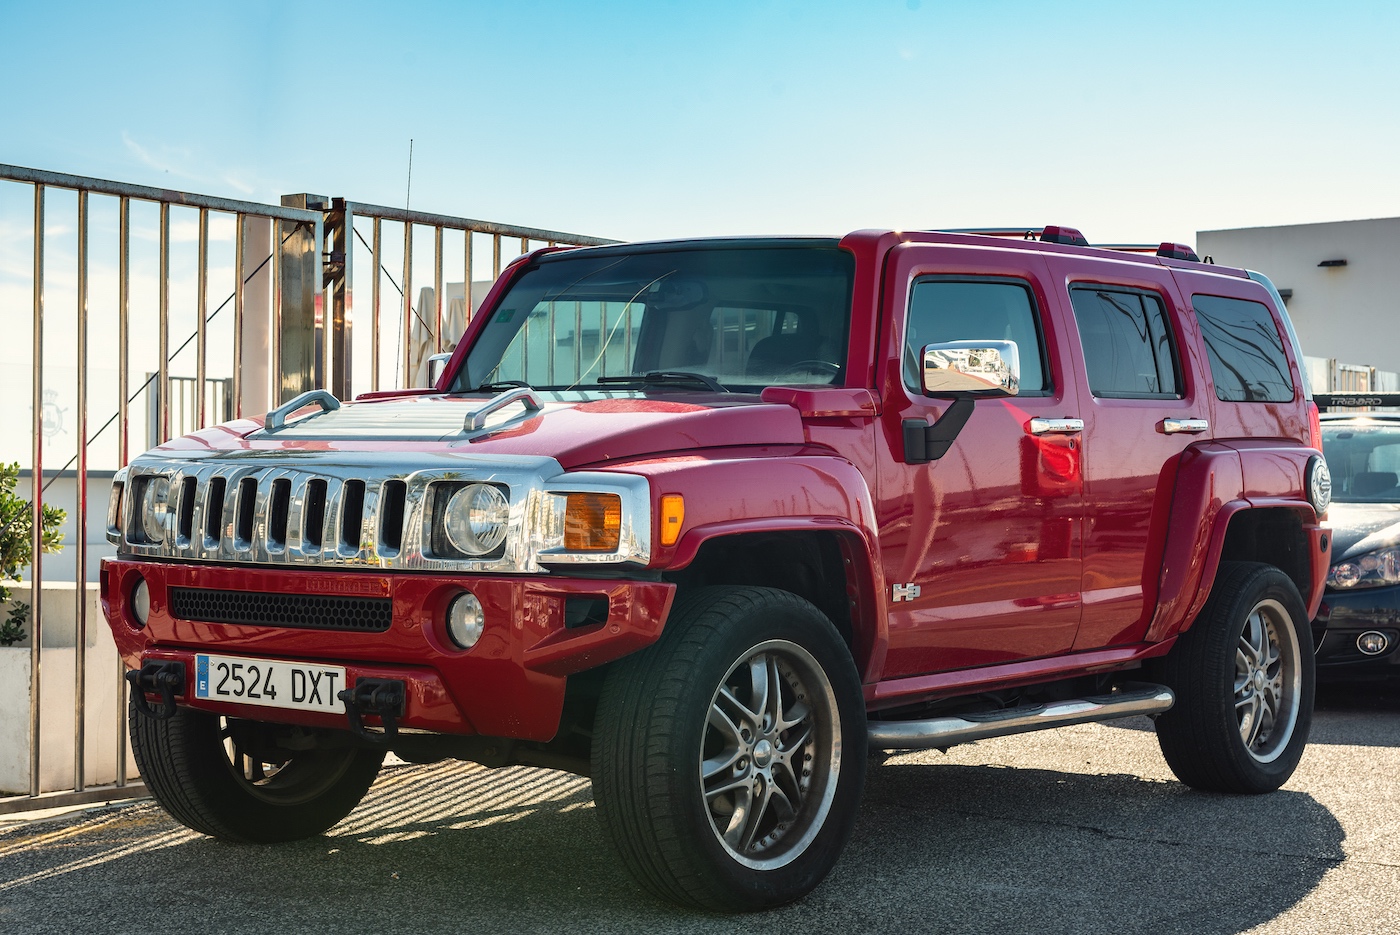 An all-electric version of the iconic Hummer may be coming soon – BGR